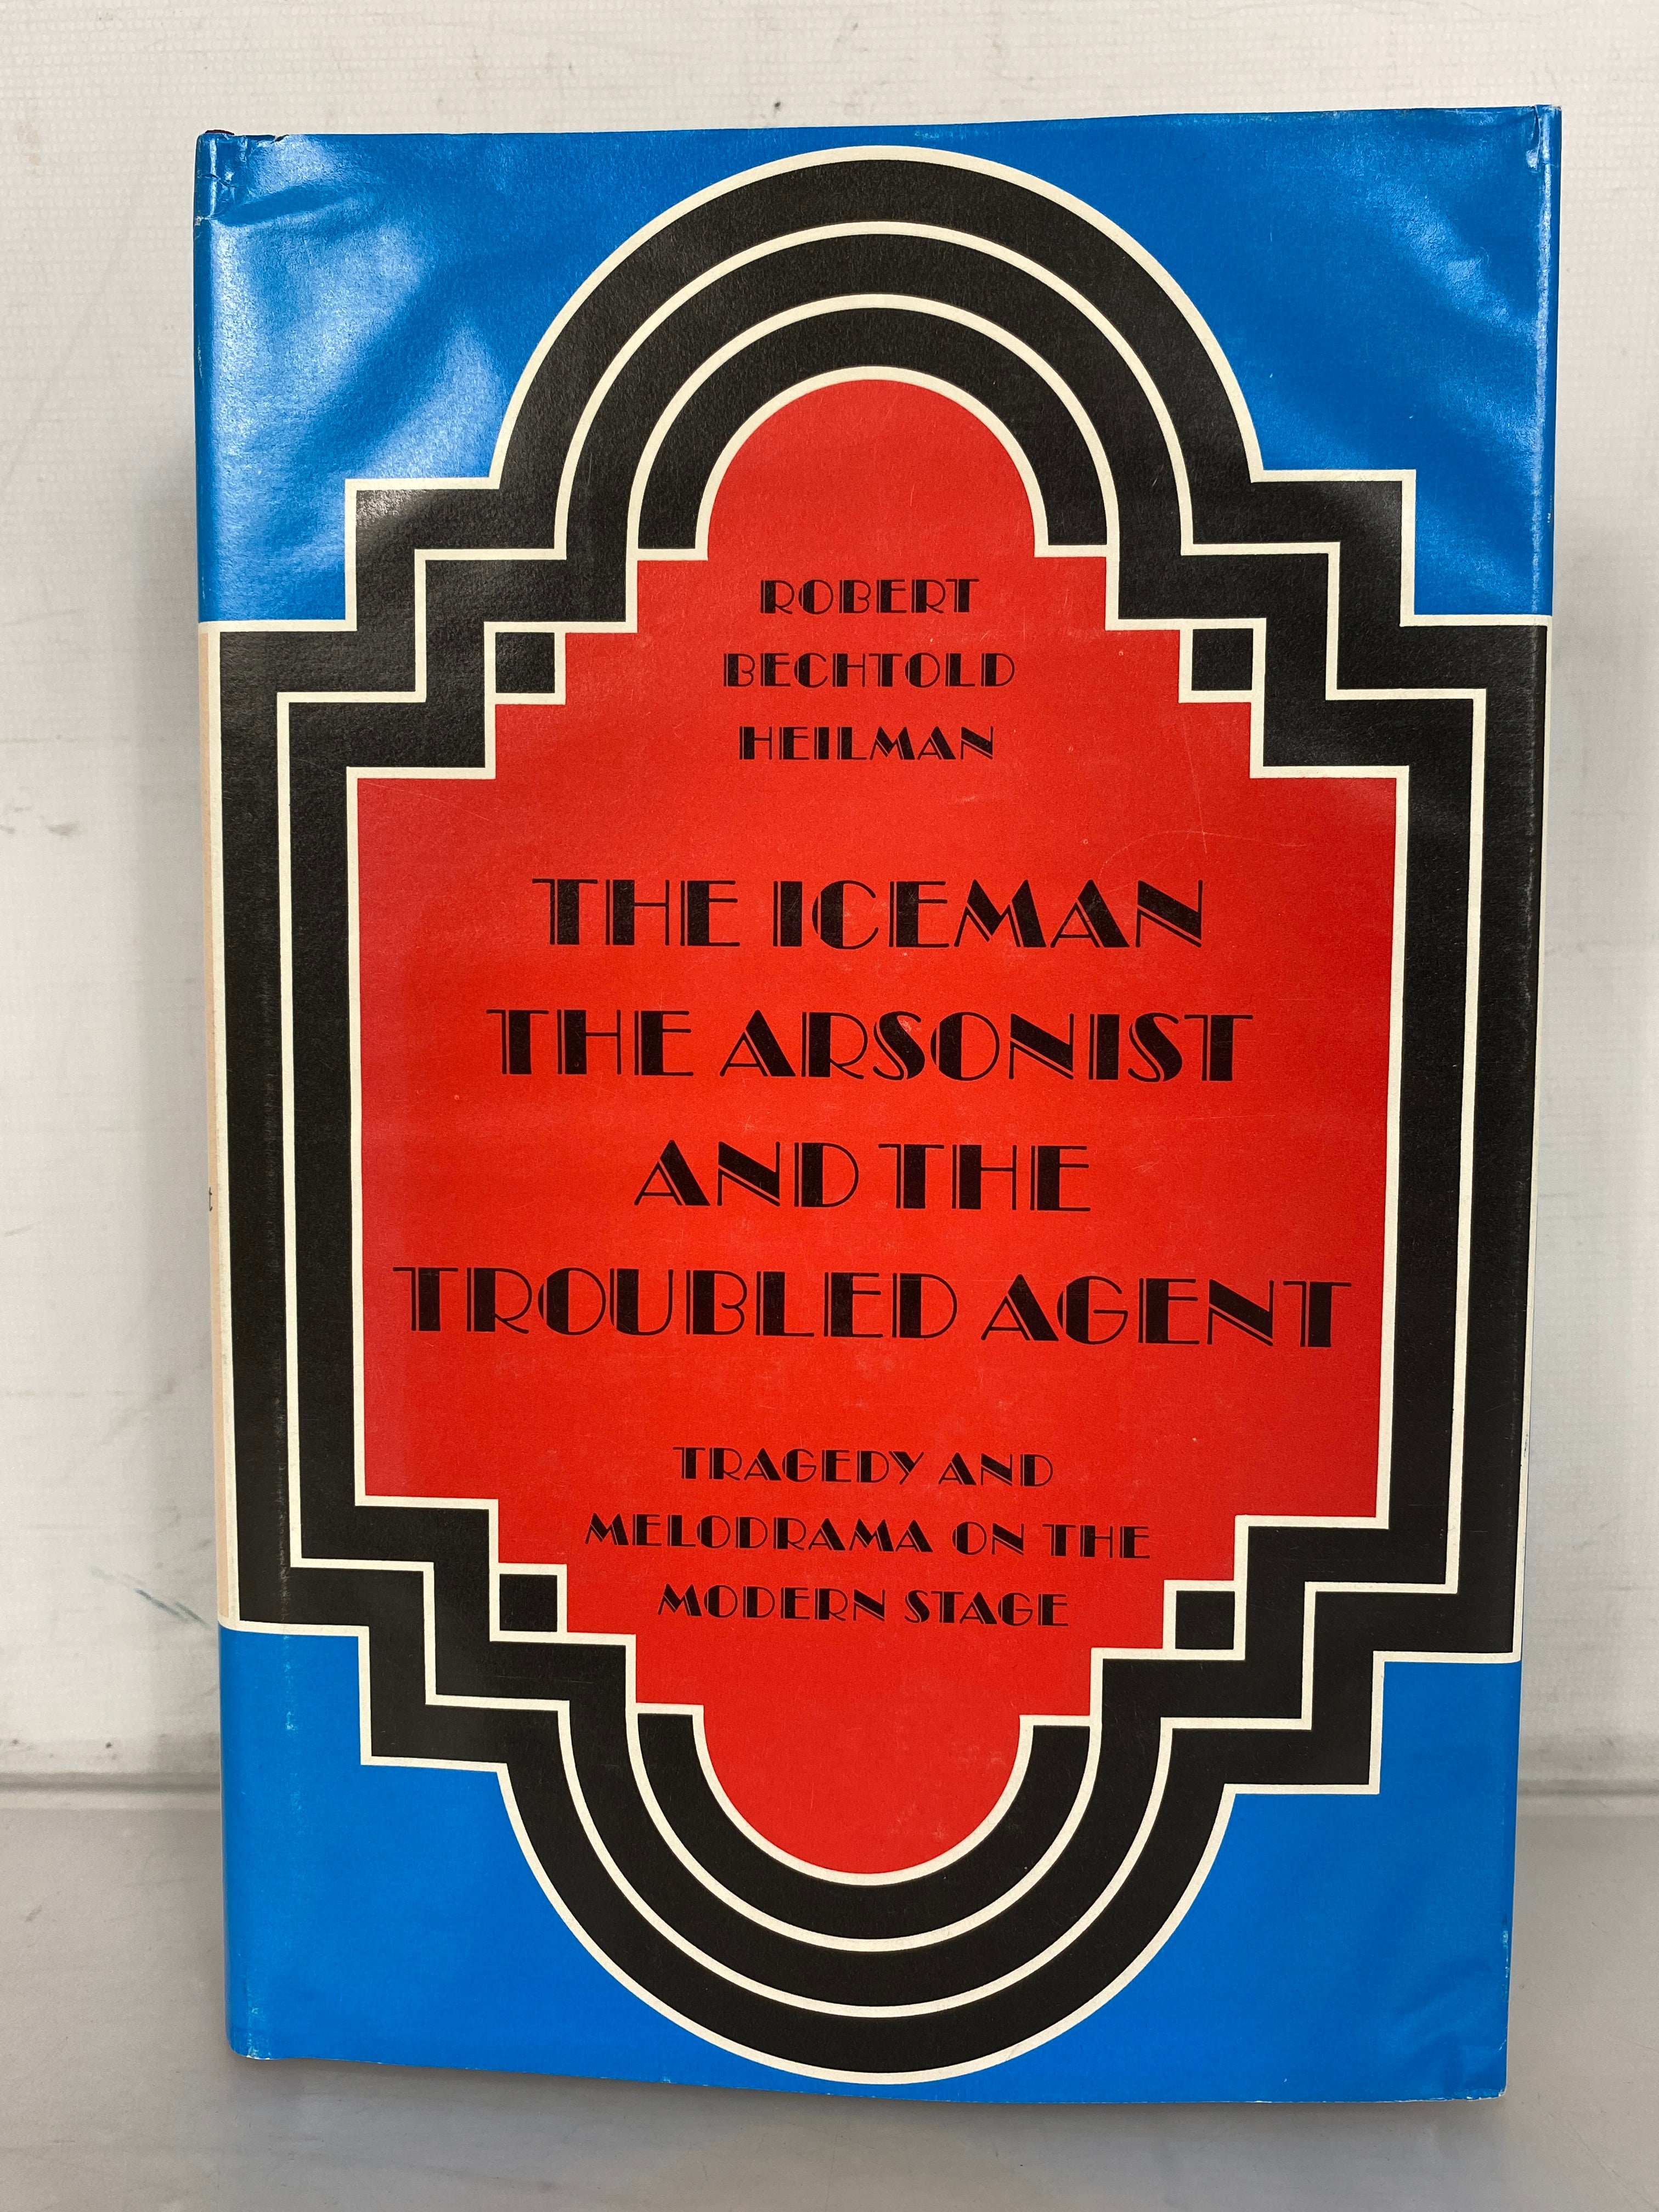 The Iceman the Arsonist and the Troubled Agent by Heilman 1973 HC DJ